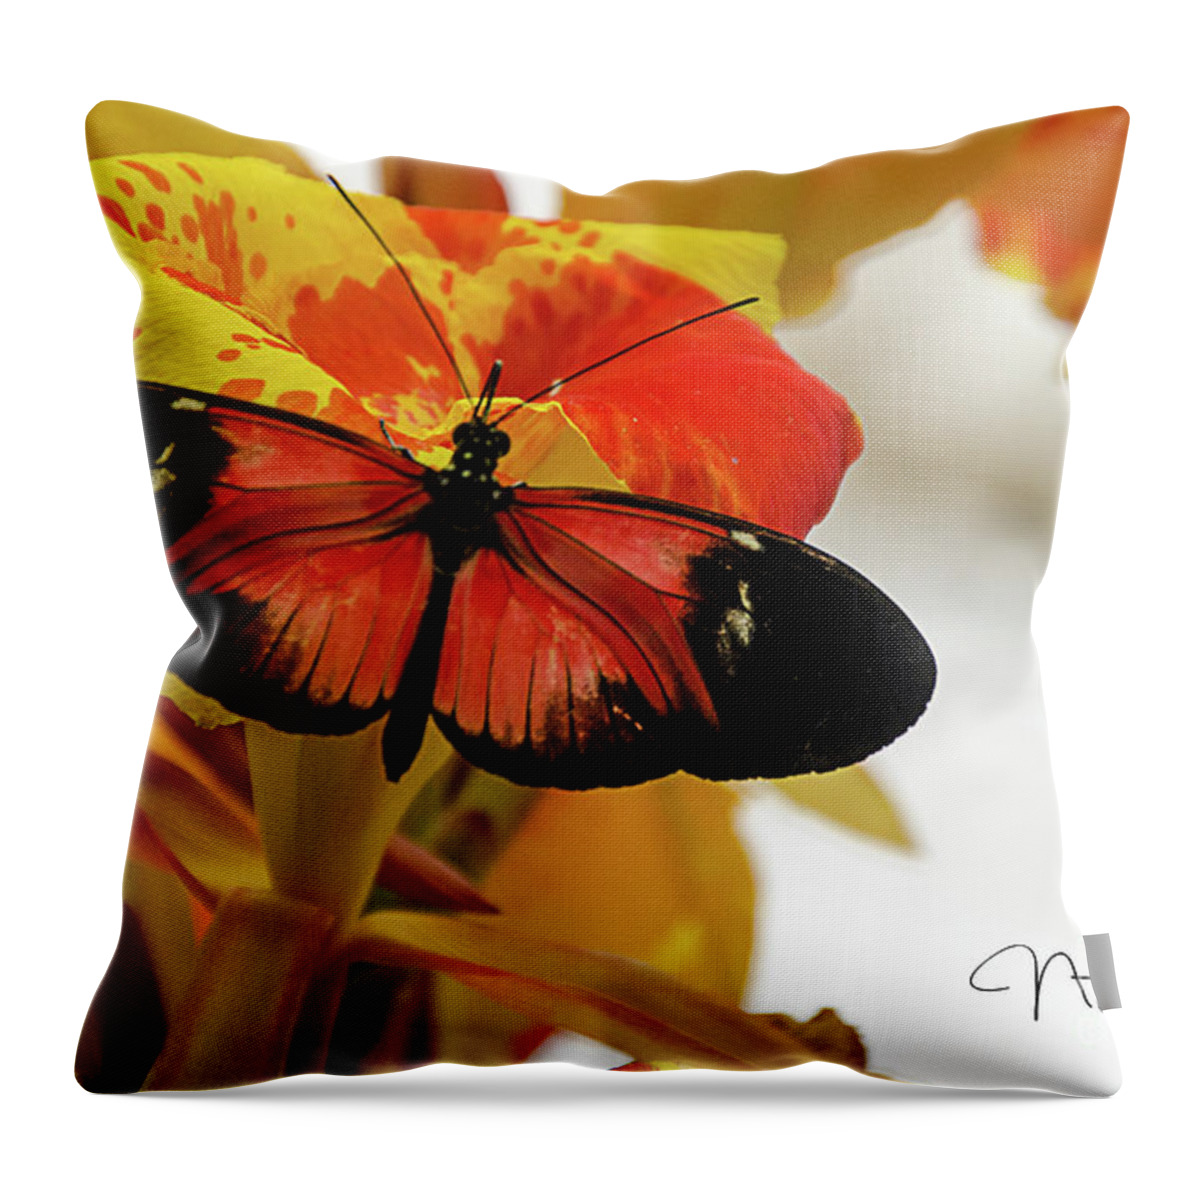 Orange Throw Pillow featuring the photograph Orange and Black Butterfly by Norma Warden